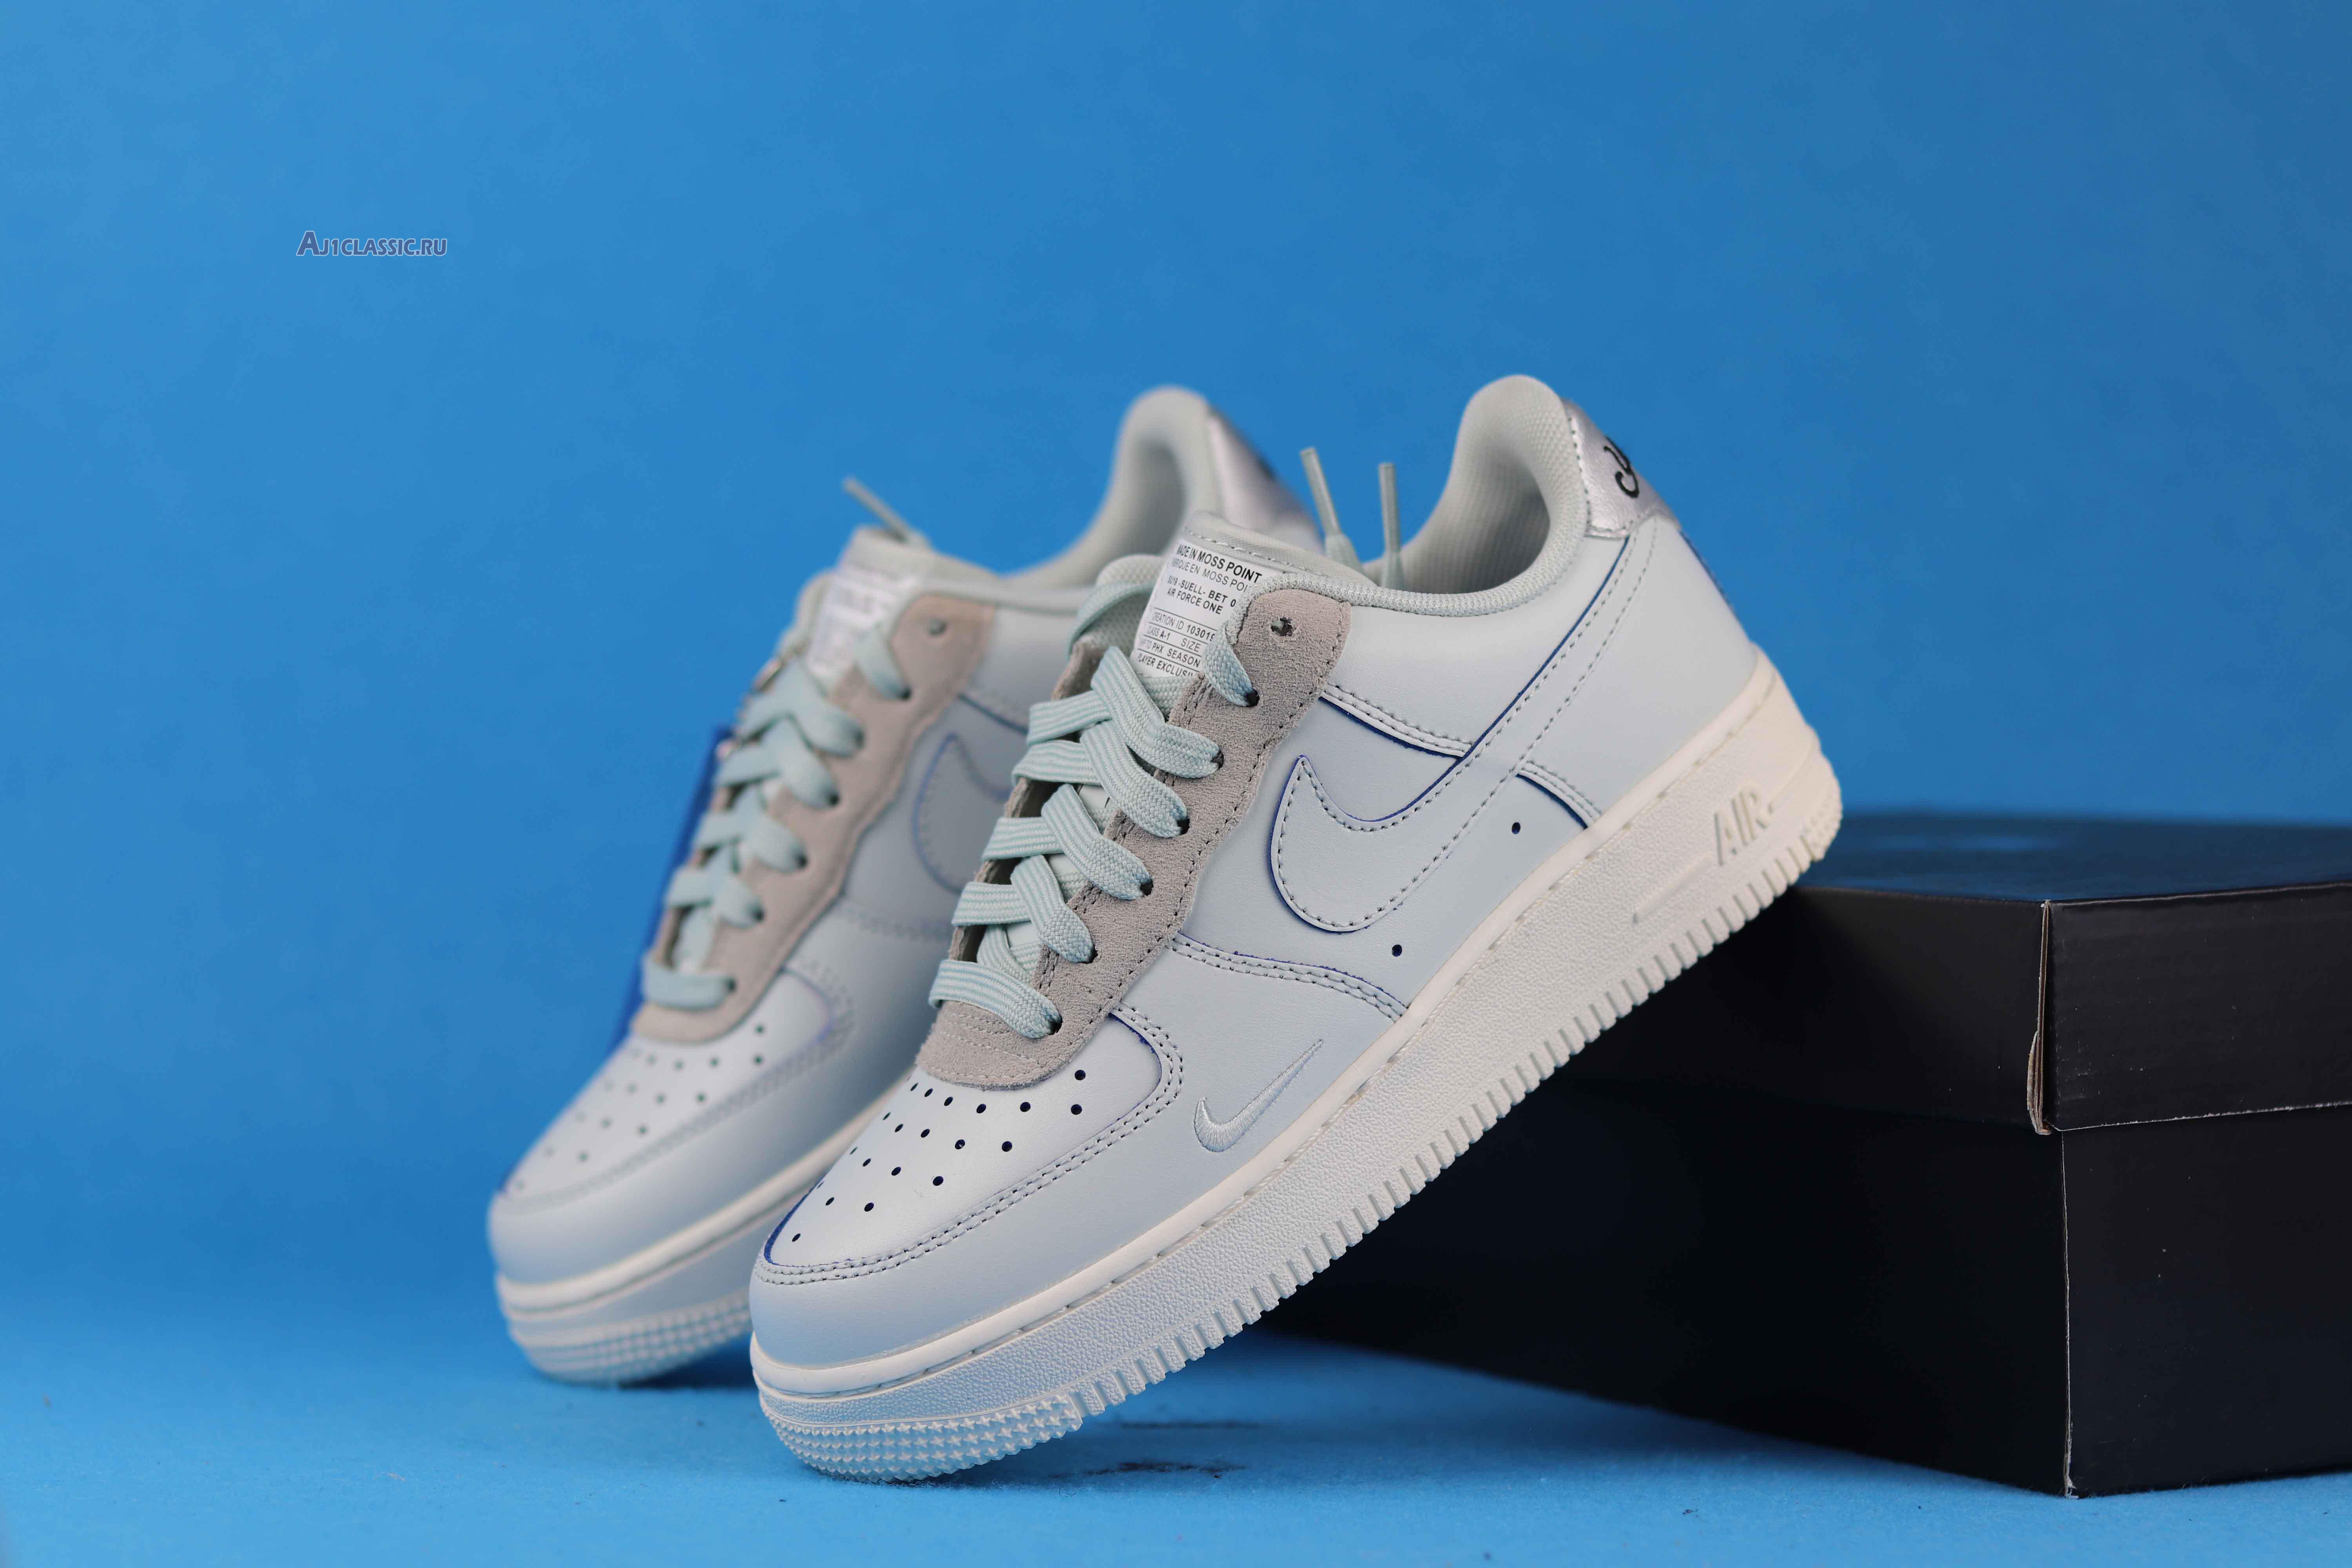 Devin Booker x Nike Air Force 1 Low LV8 Moss Point PE CJ9716001 Barely